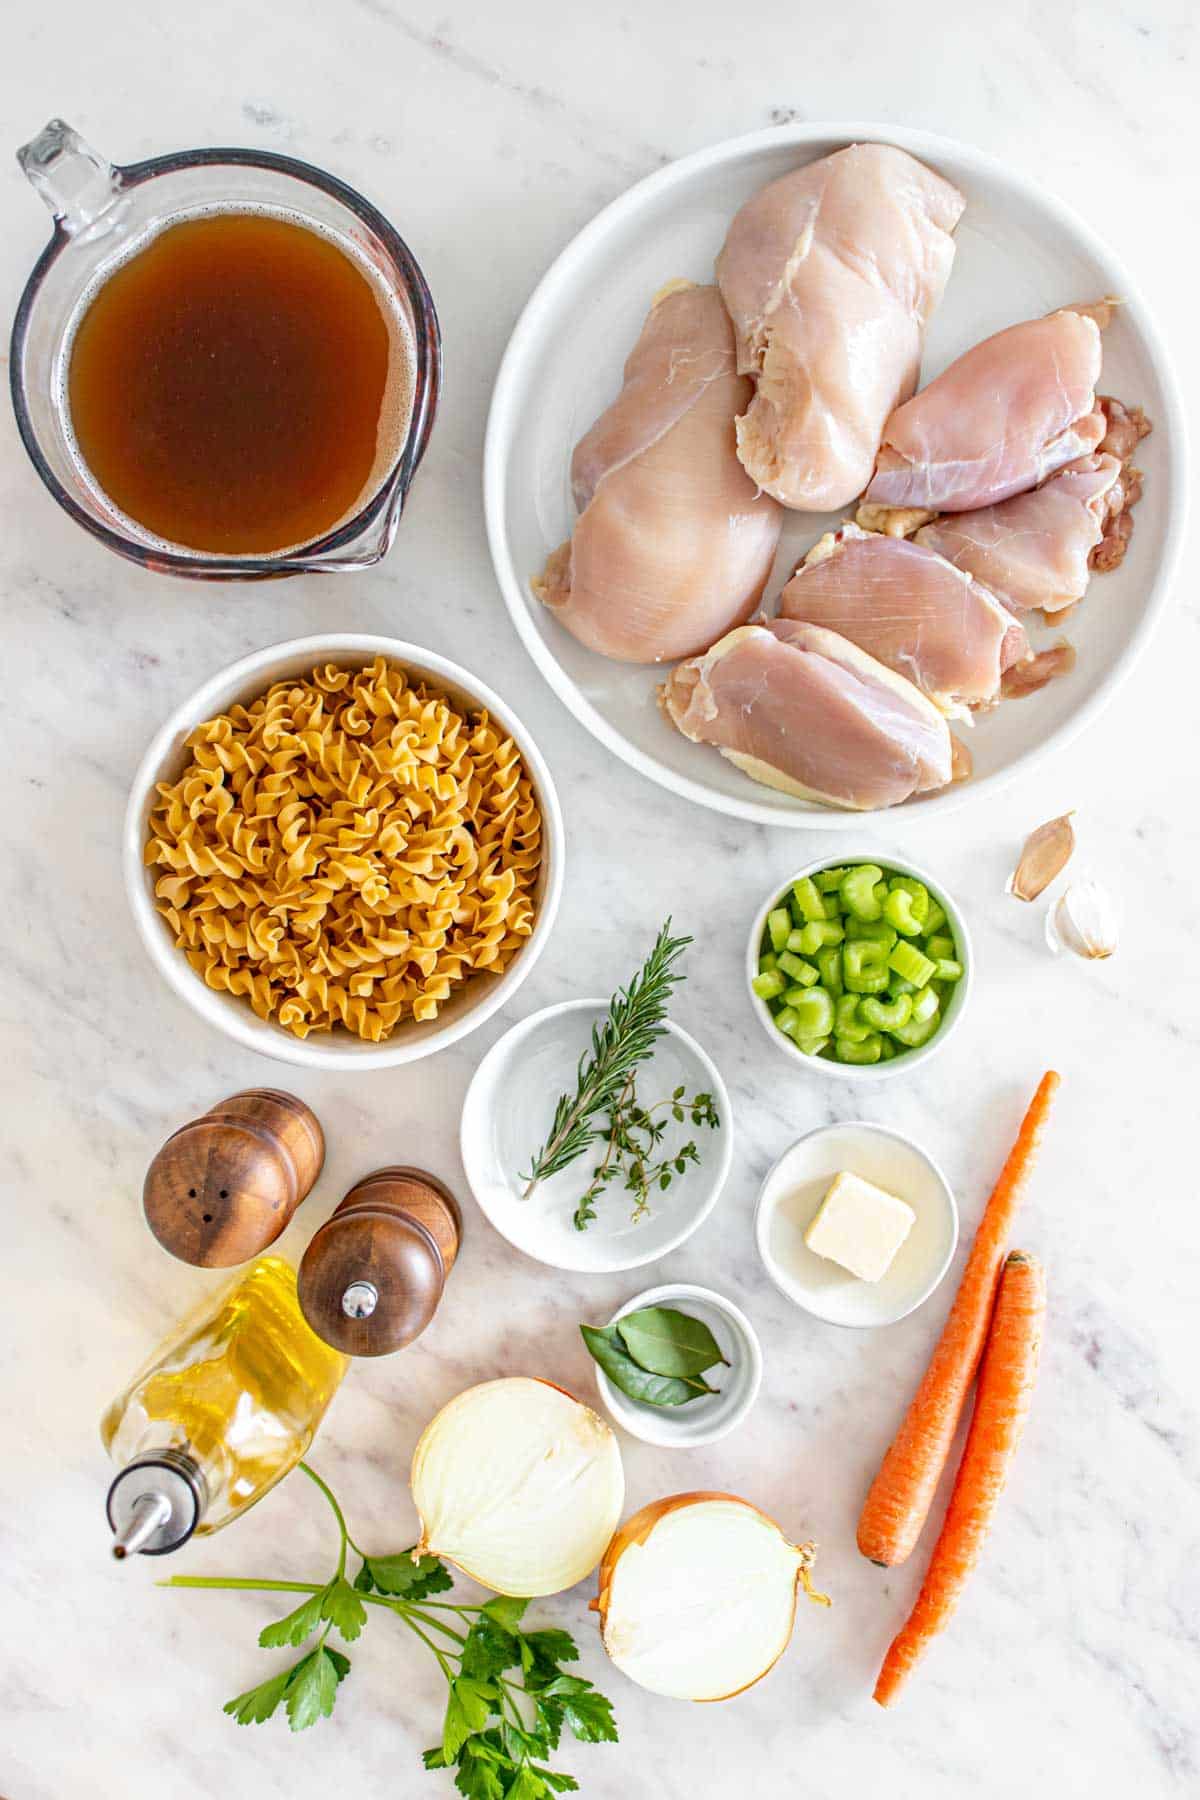 Ingredients for a chicken recipe laid out on a marble countertop, including raw chicken, pasta, vegetables, and broth.